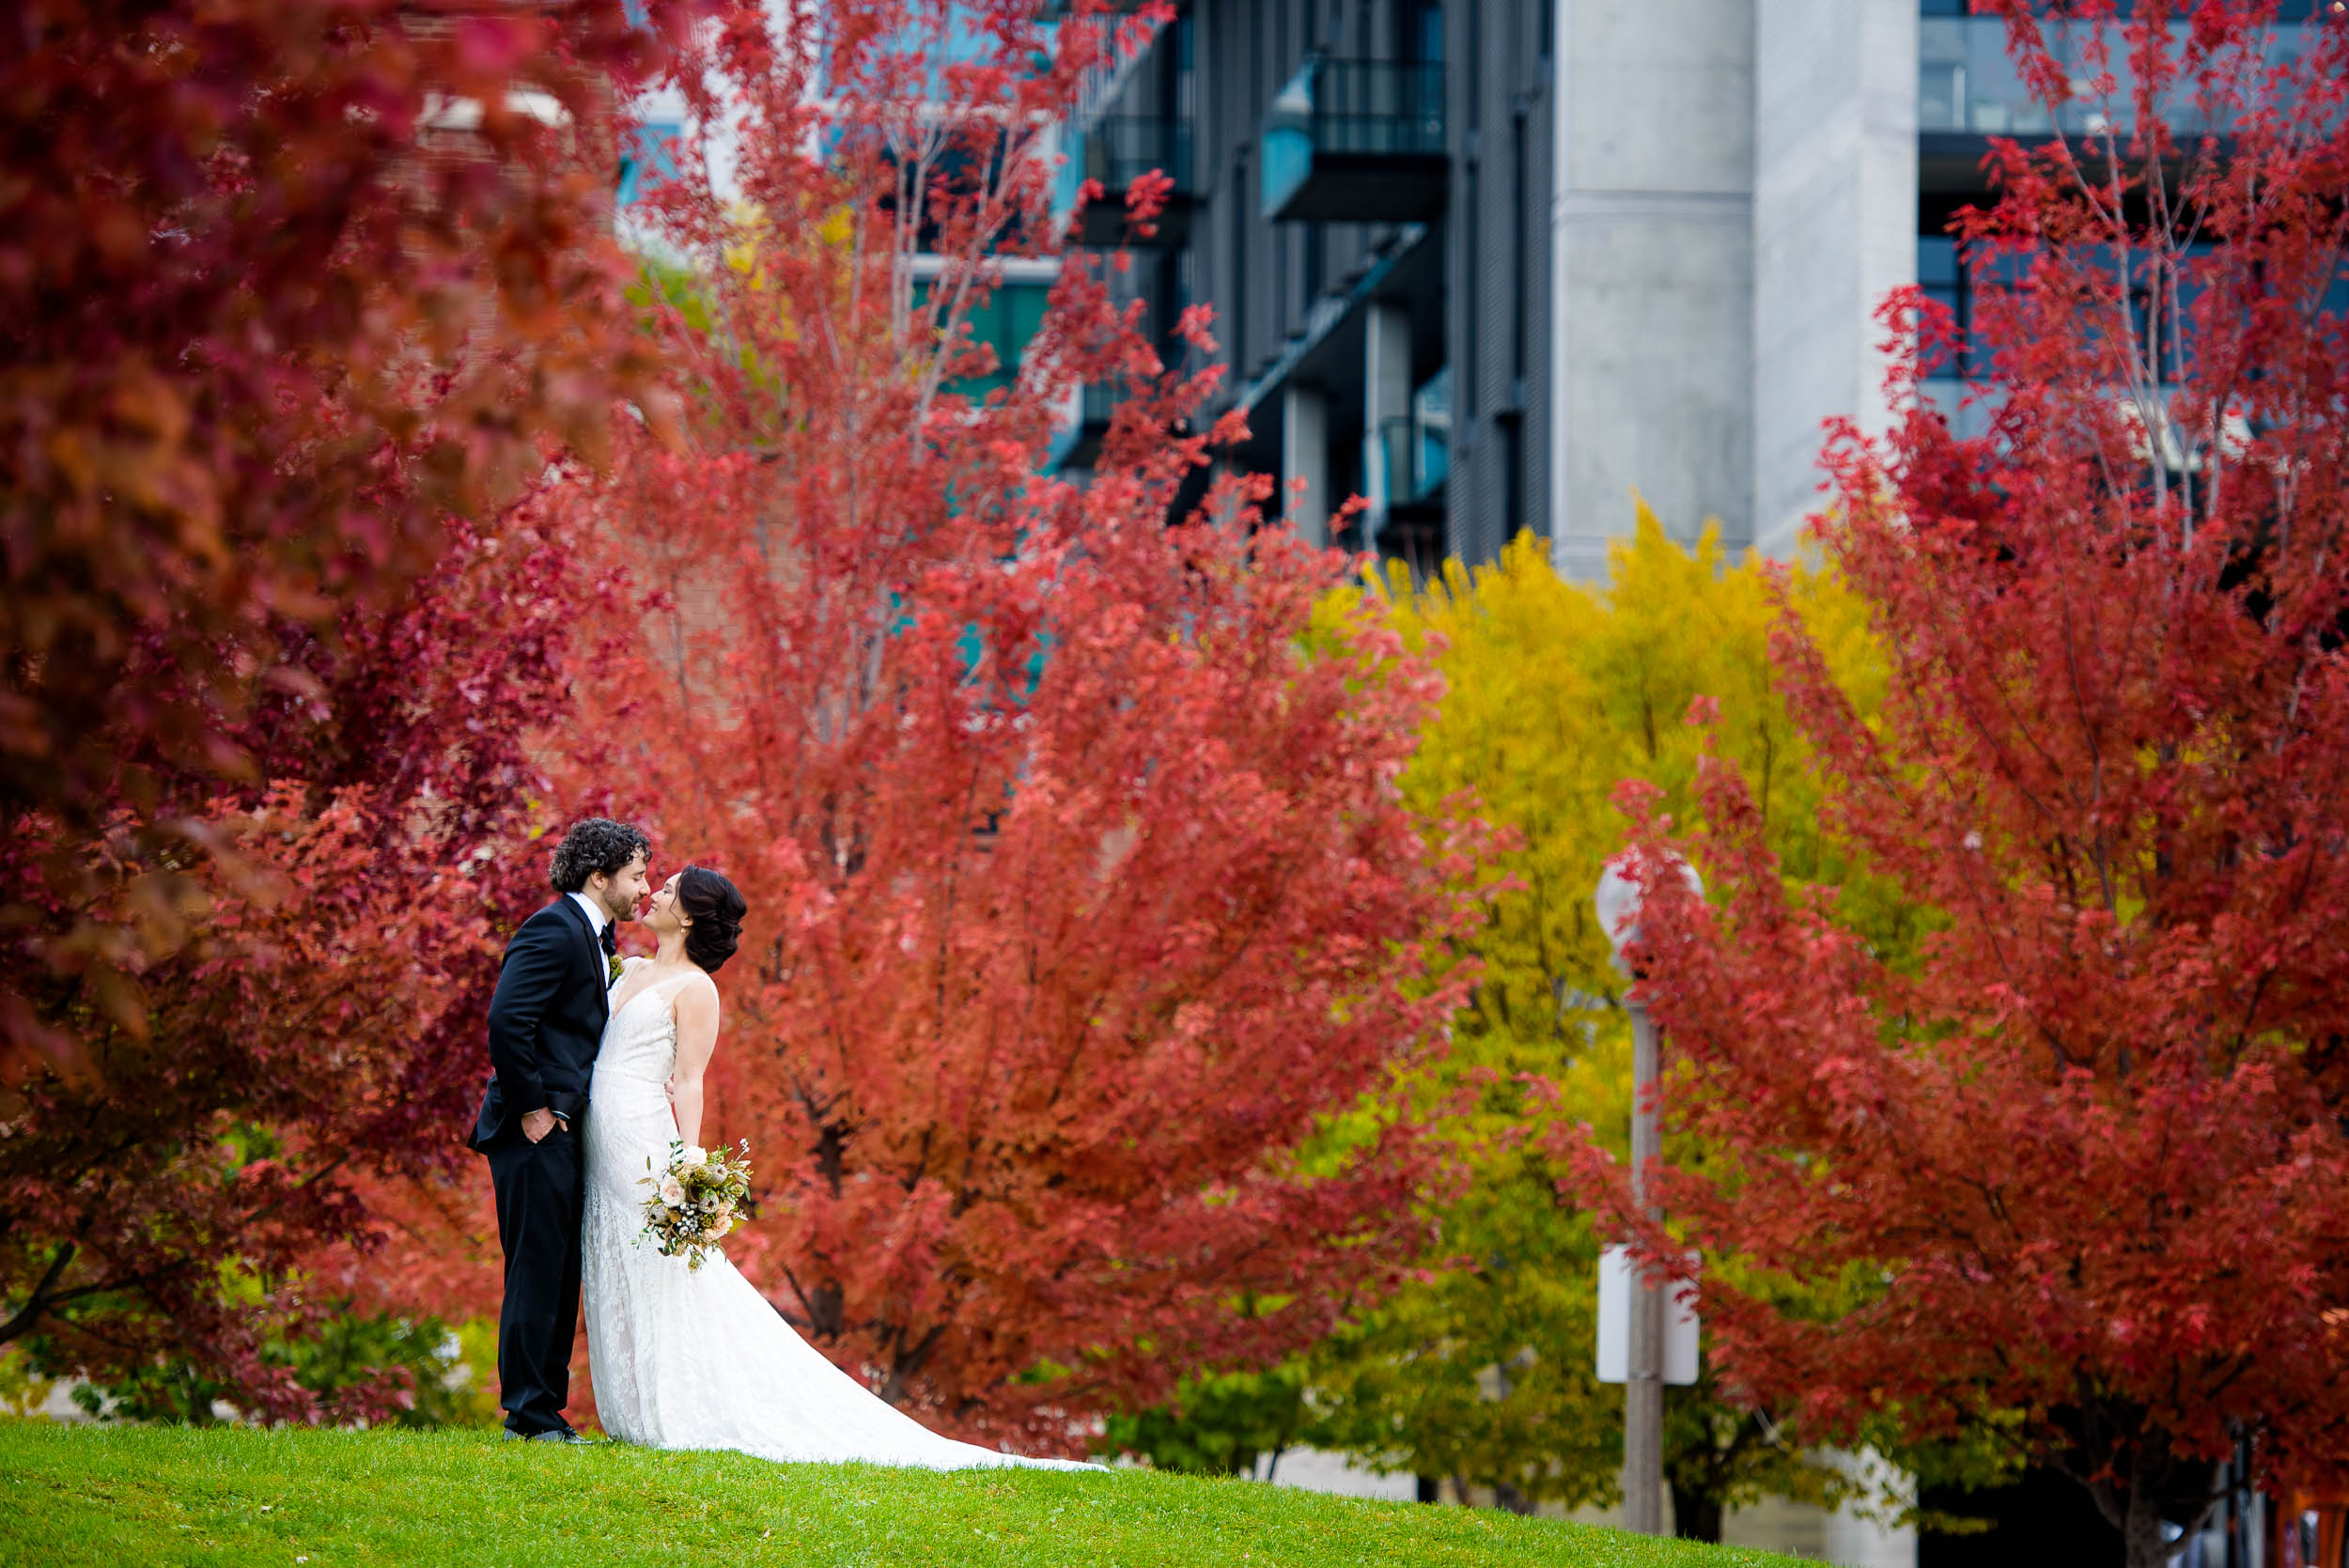 Bride and groom kiss amongst the fall colors at Mary Bartelme Park.